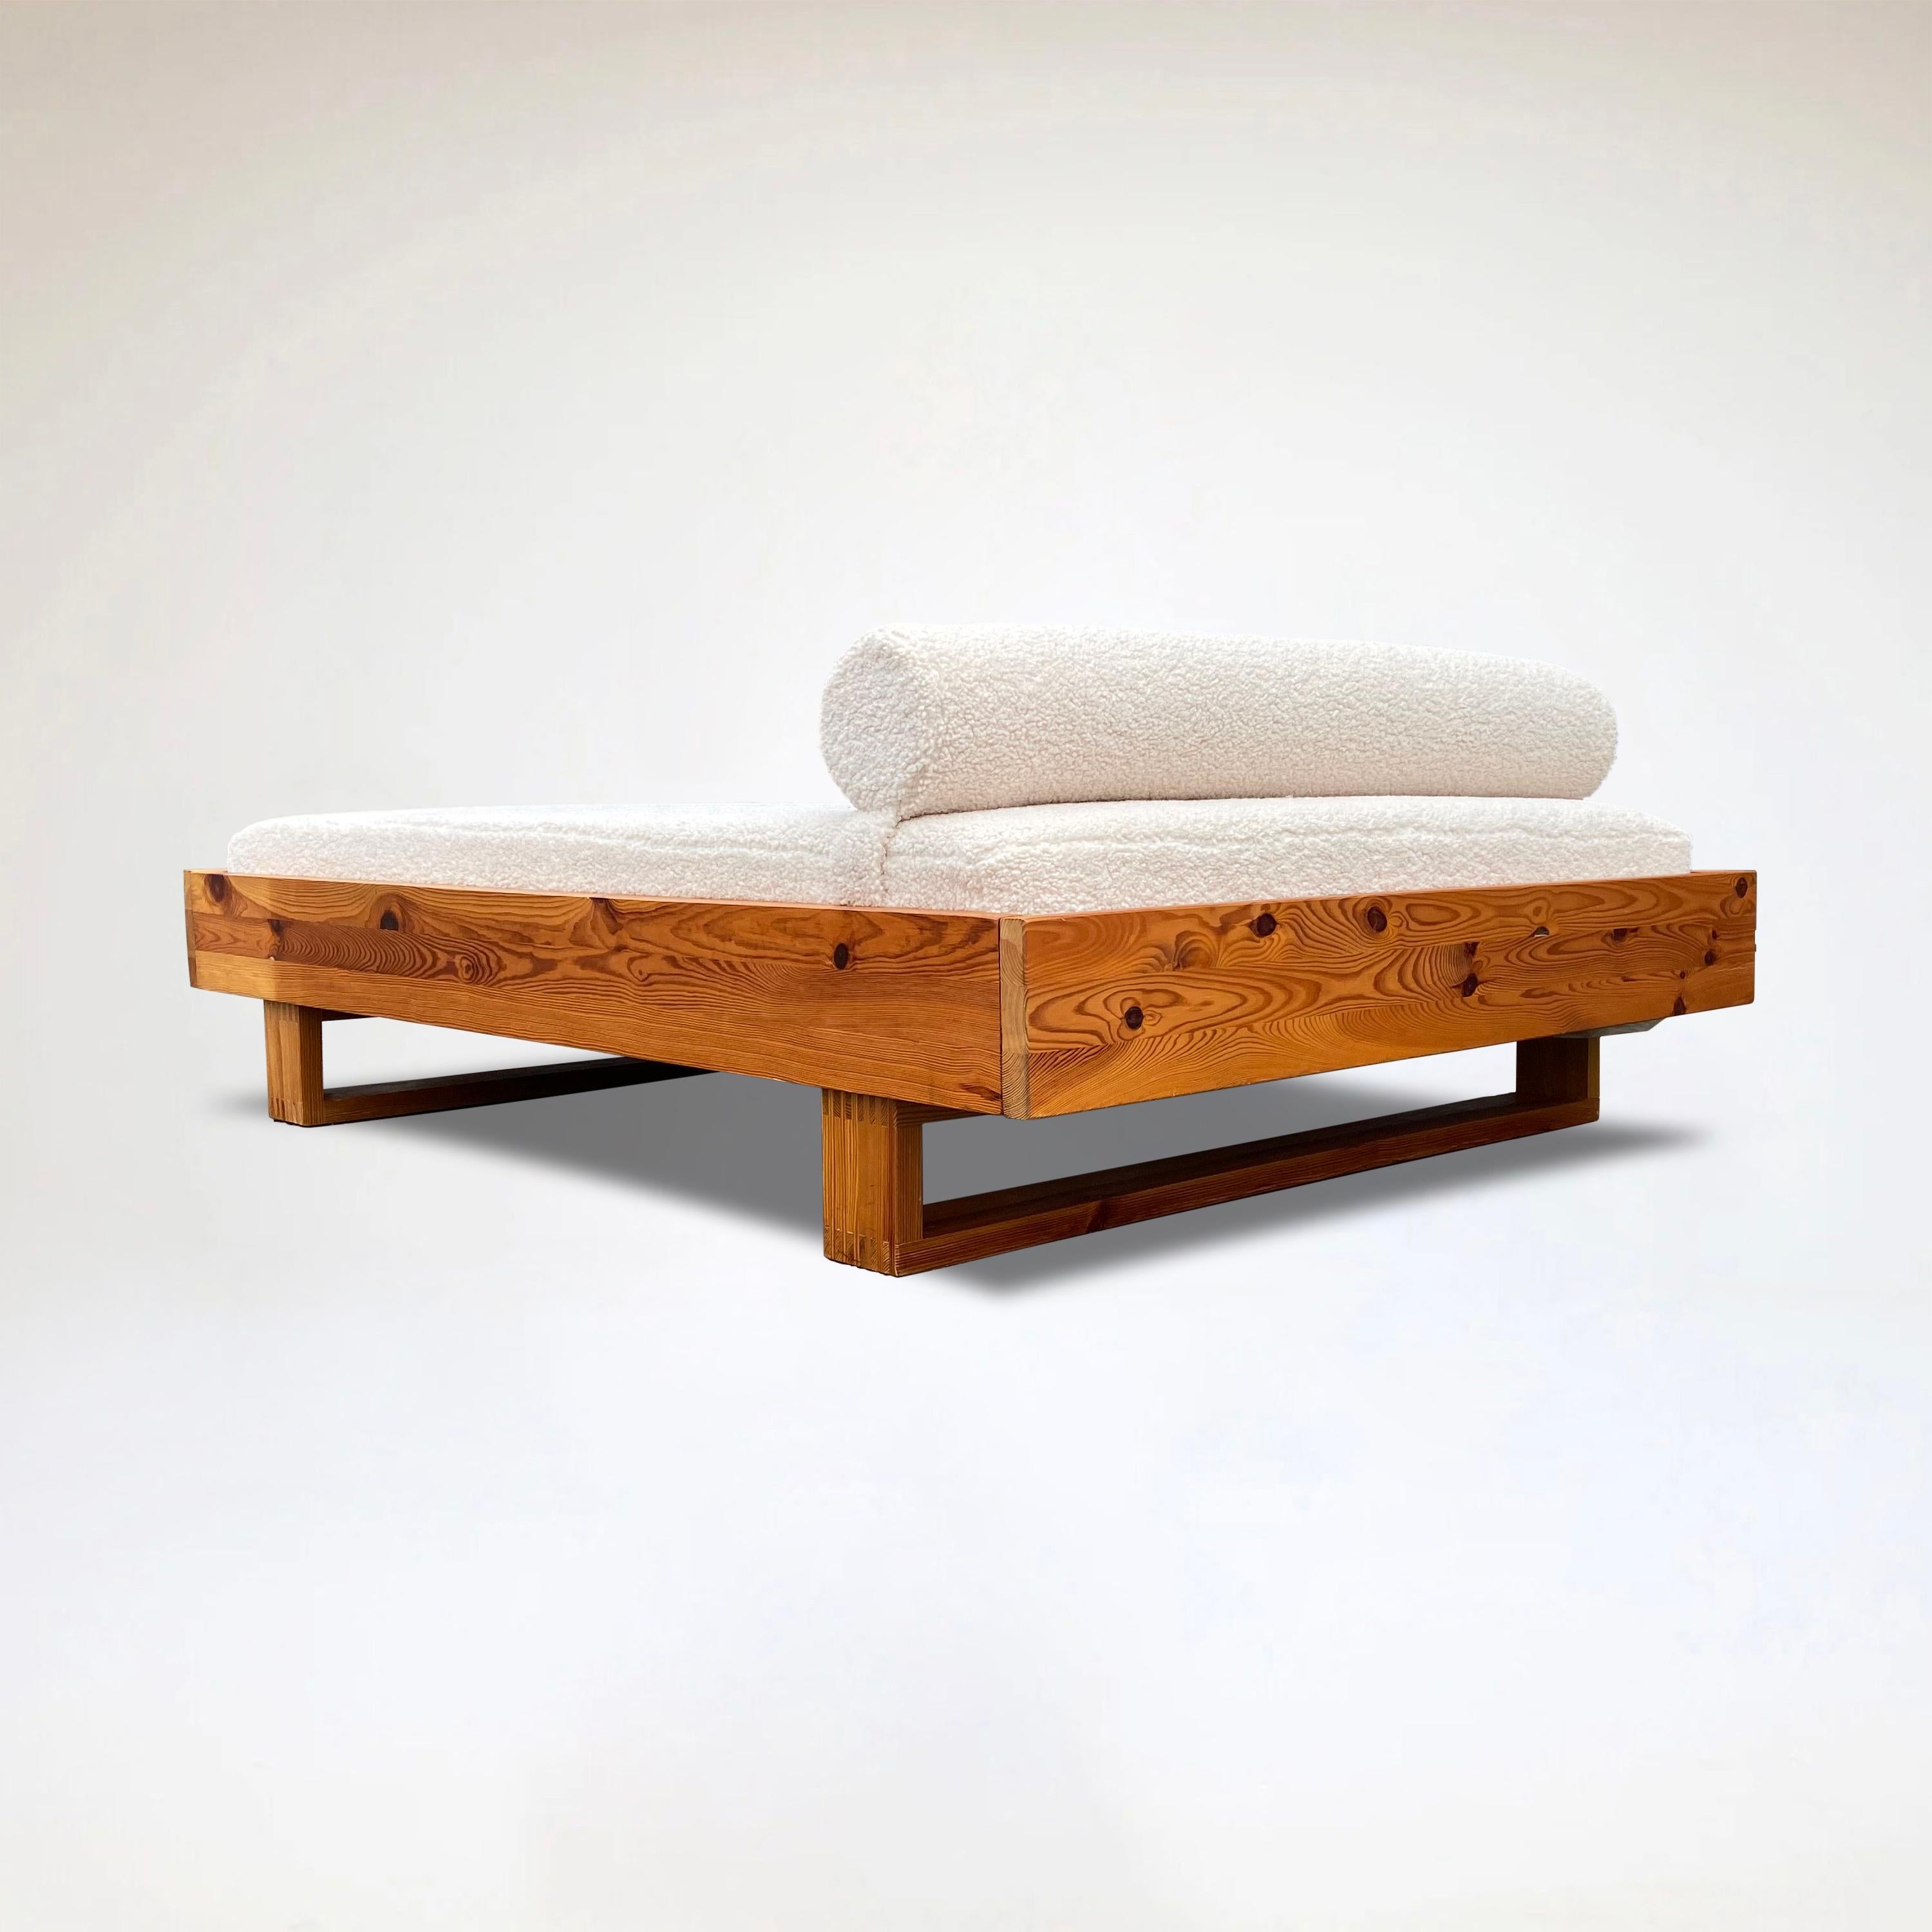 Modernist pine and bouclé daybed by Ate van Apeldoorn for Houtwerk Hattem 1970s In Good Condition For Sale In Stavenisse, NL